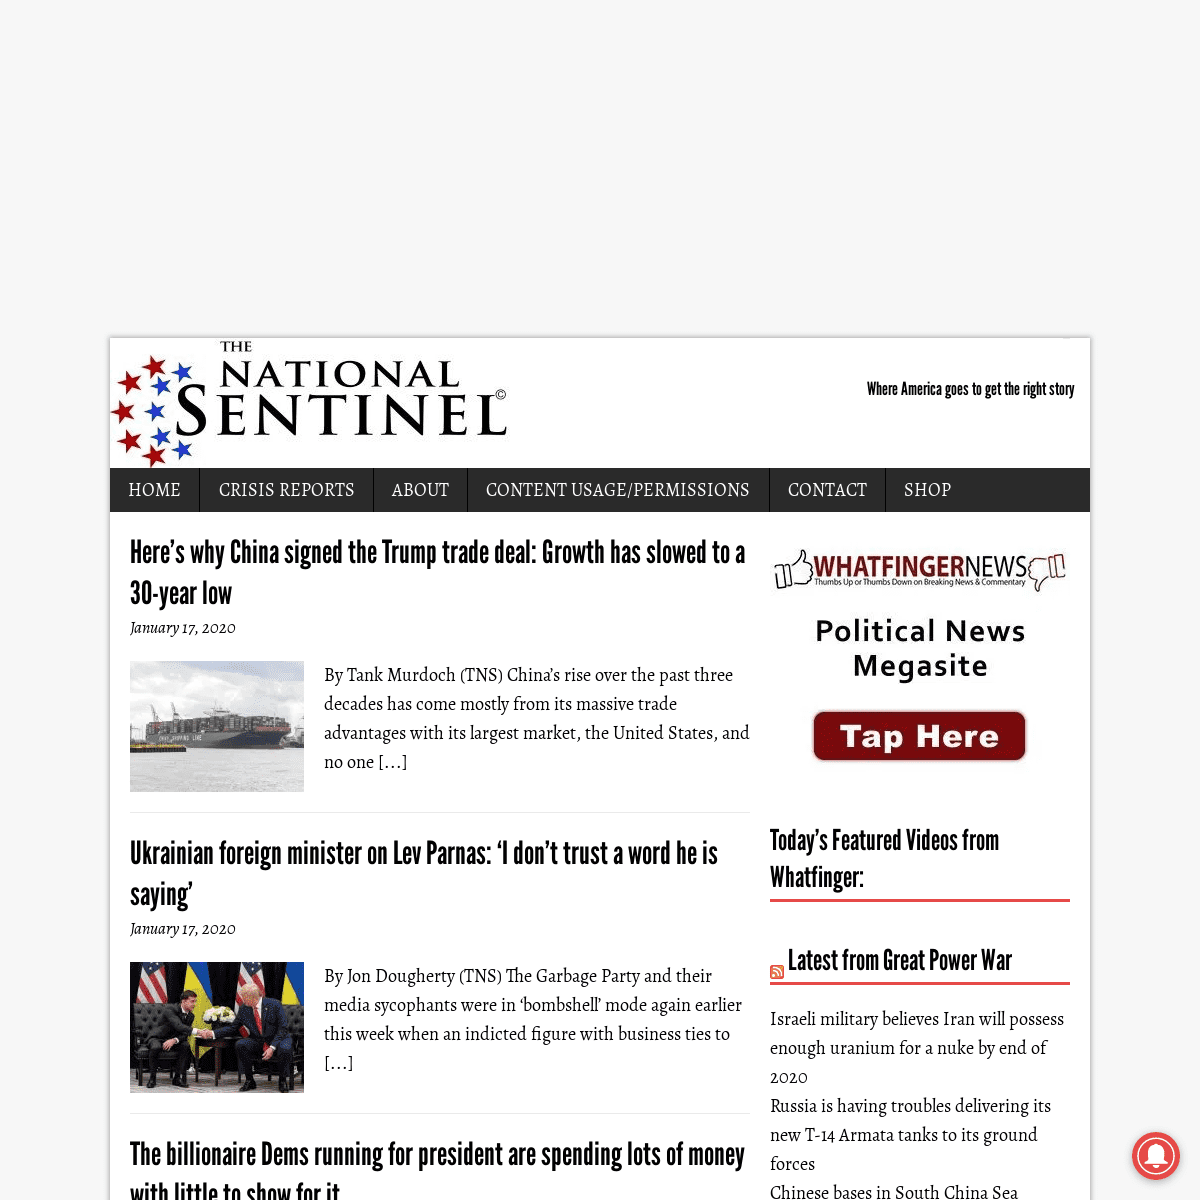 A complete backup of thenationalsentinel.com